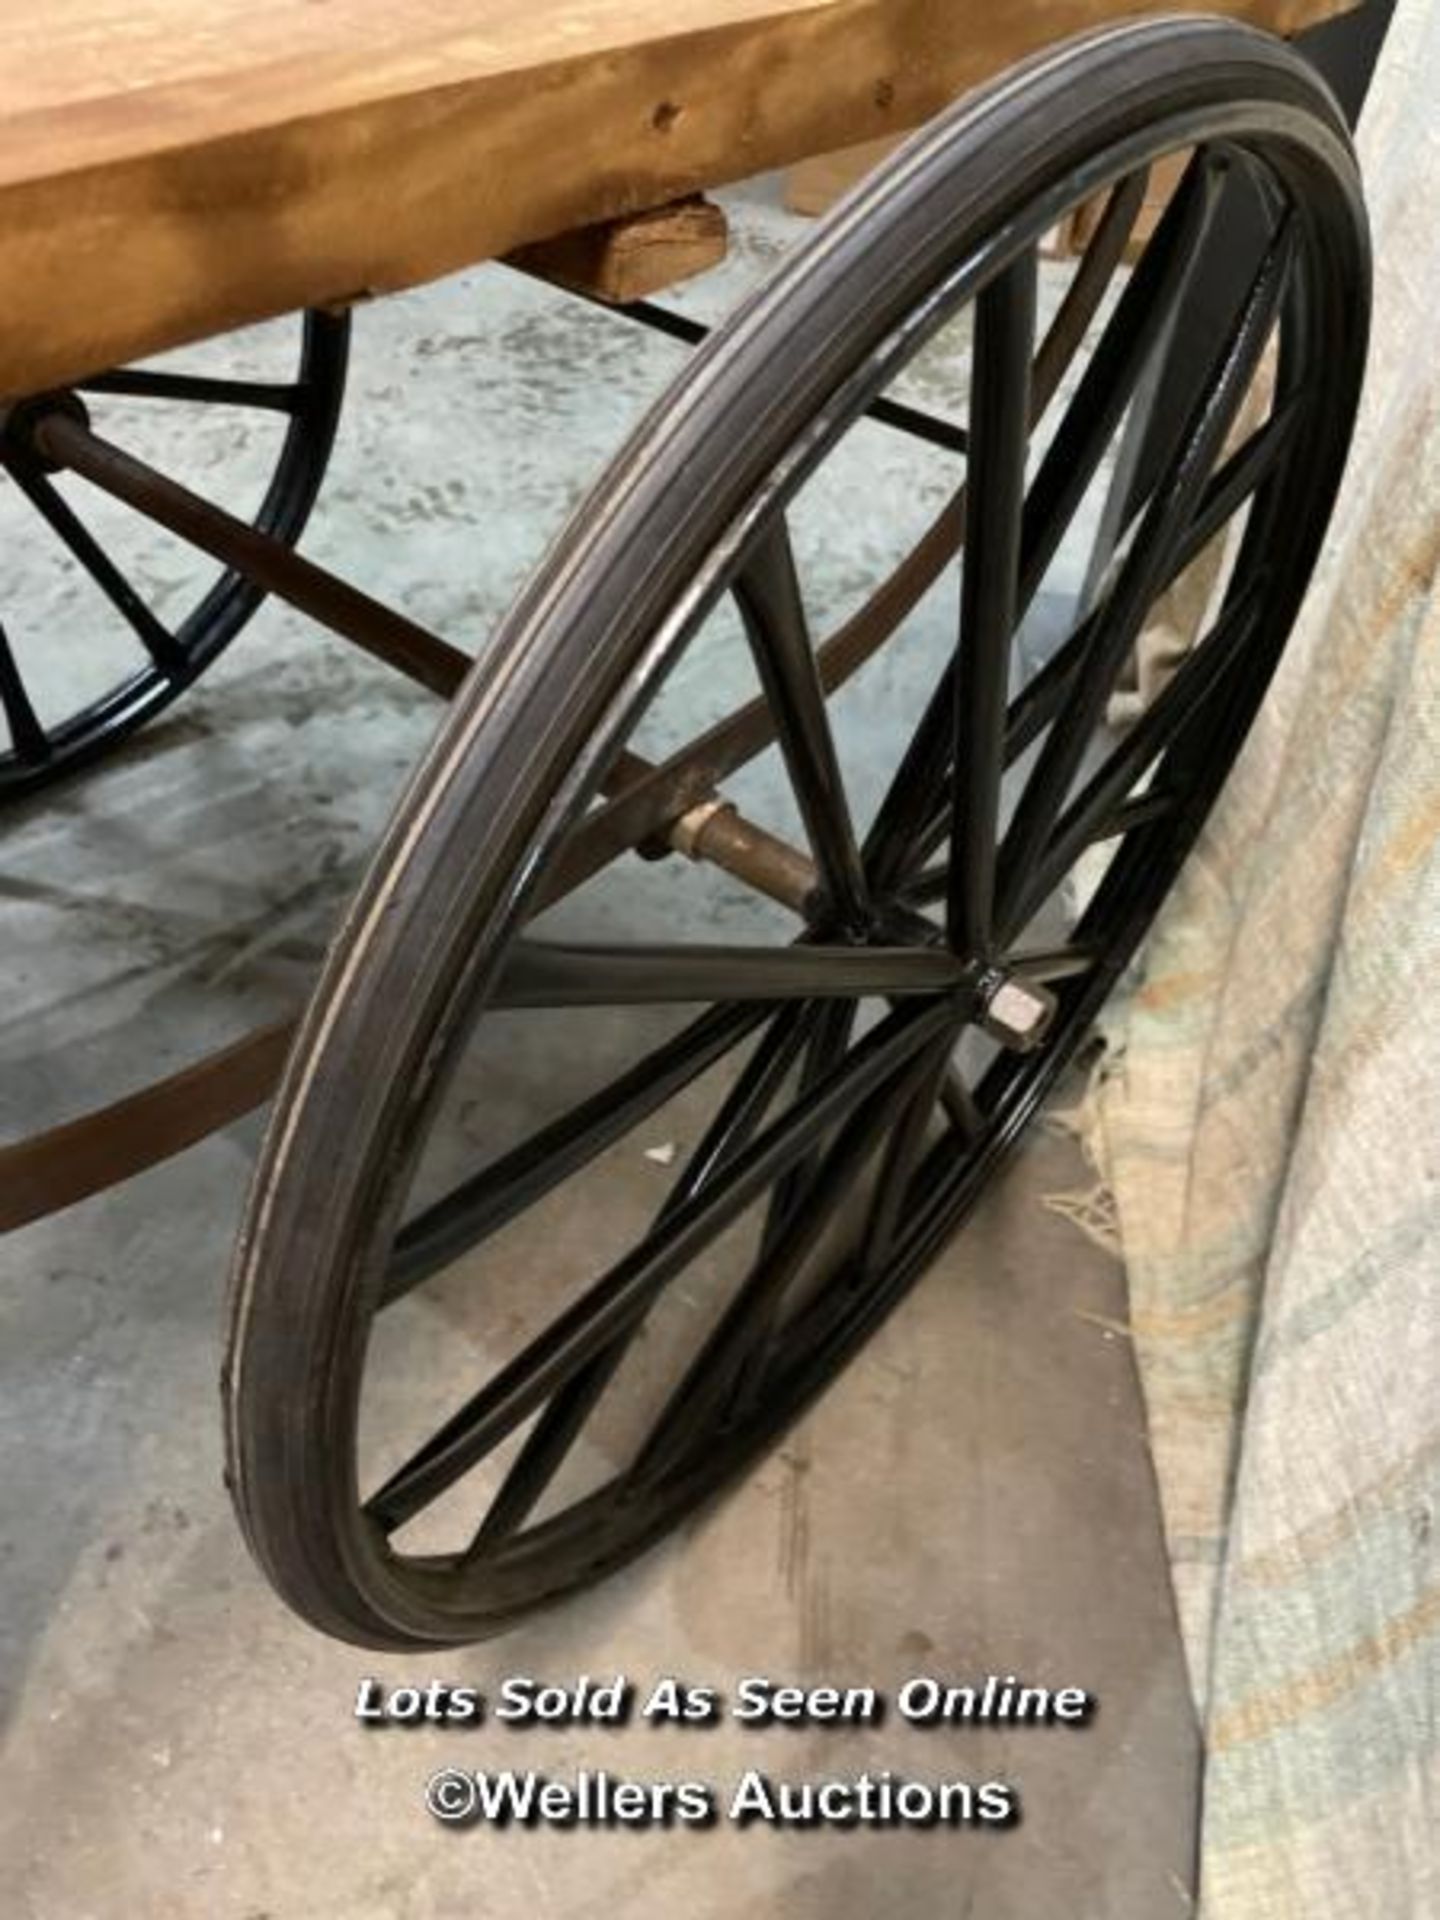 *TRADERS 2 WHEEL BARROW, BED 100CM (L) X 65CM (H), WHEELS 68CM (DIA) / COLLECTION LOCATION: - Image 4 of 4